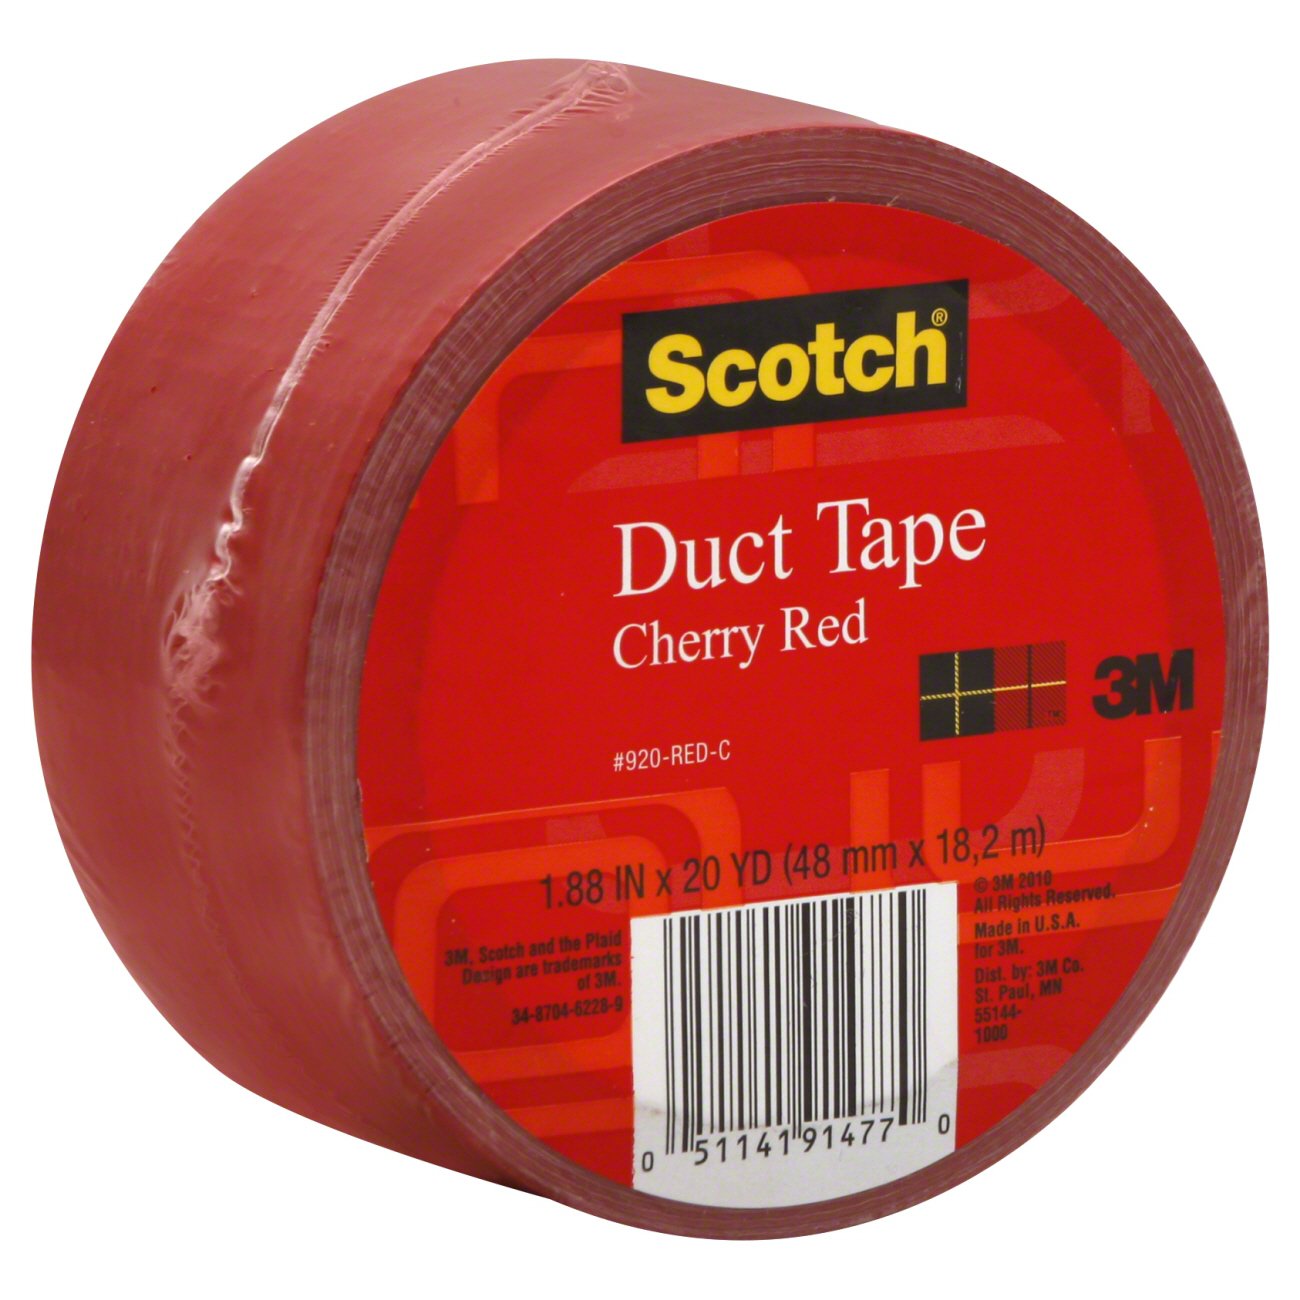 1.88" x 60 yds 975 Supply 1 Roll Red Duct Tape 